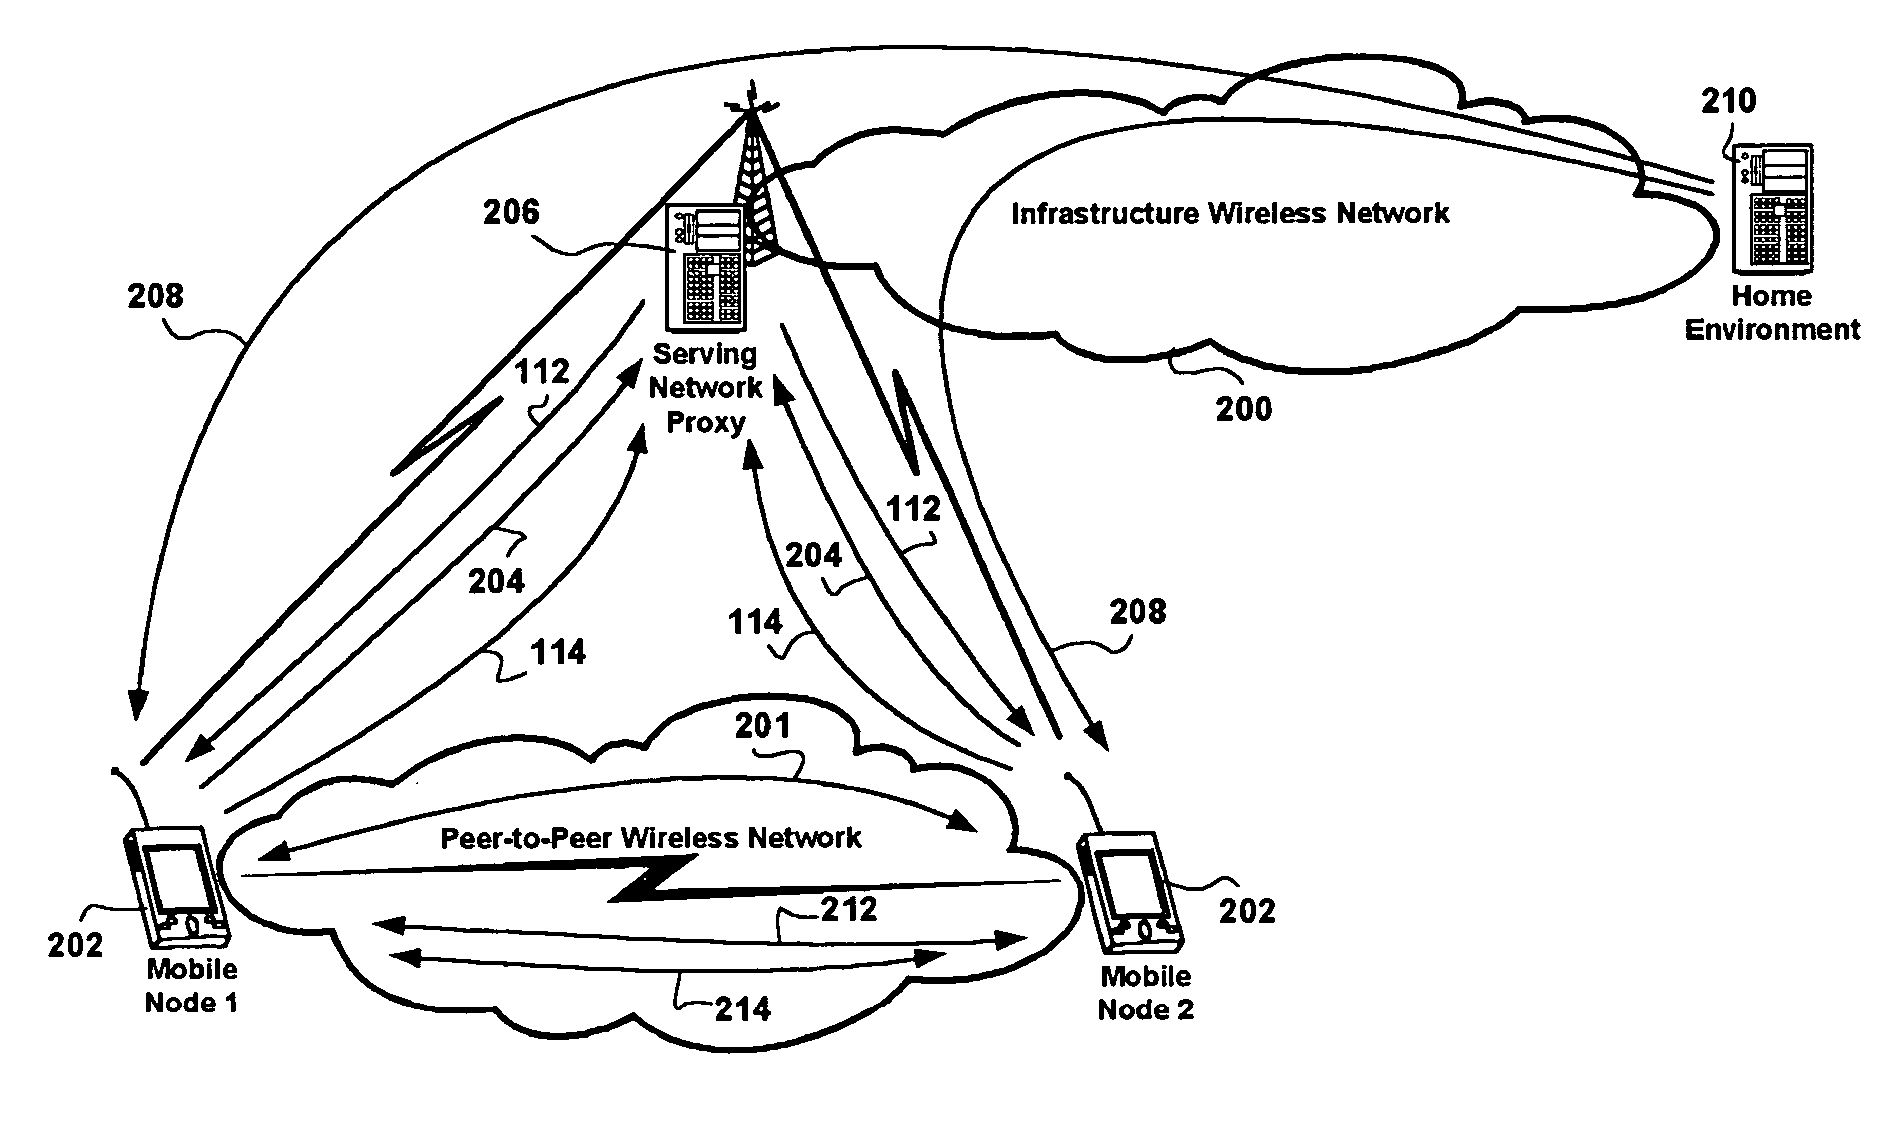 Method of authenticating a mobile network node in establishing a peer-to-peer secure context between a pair of communicating mobile network nodes